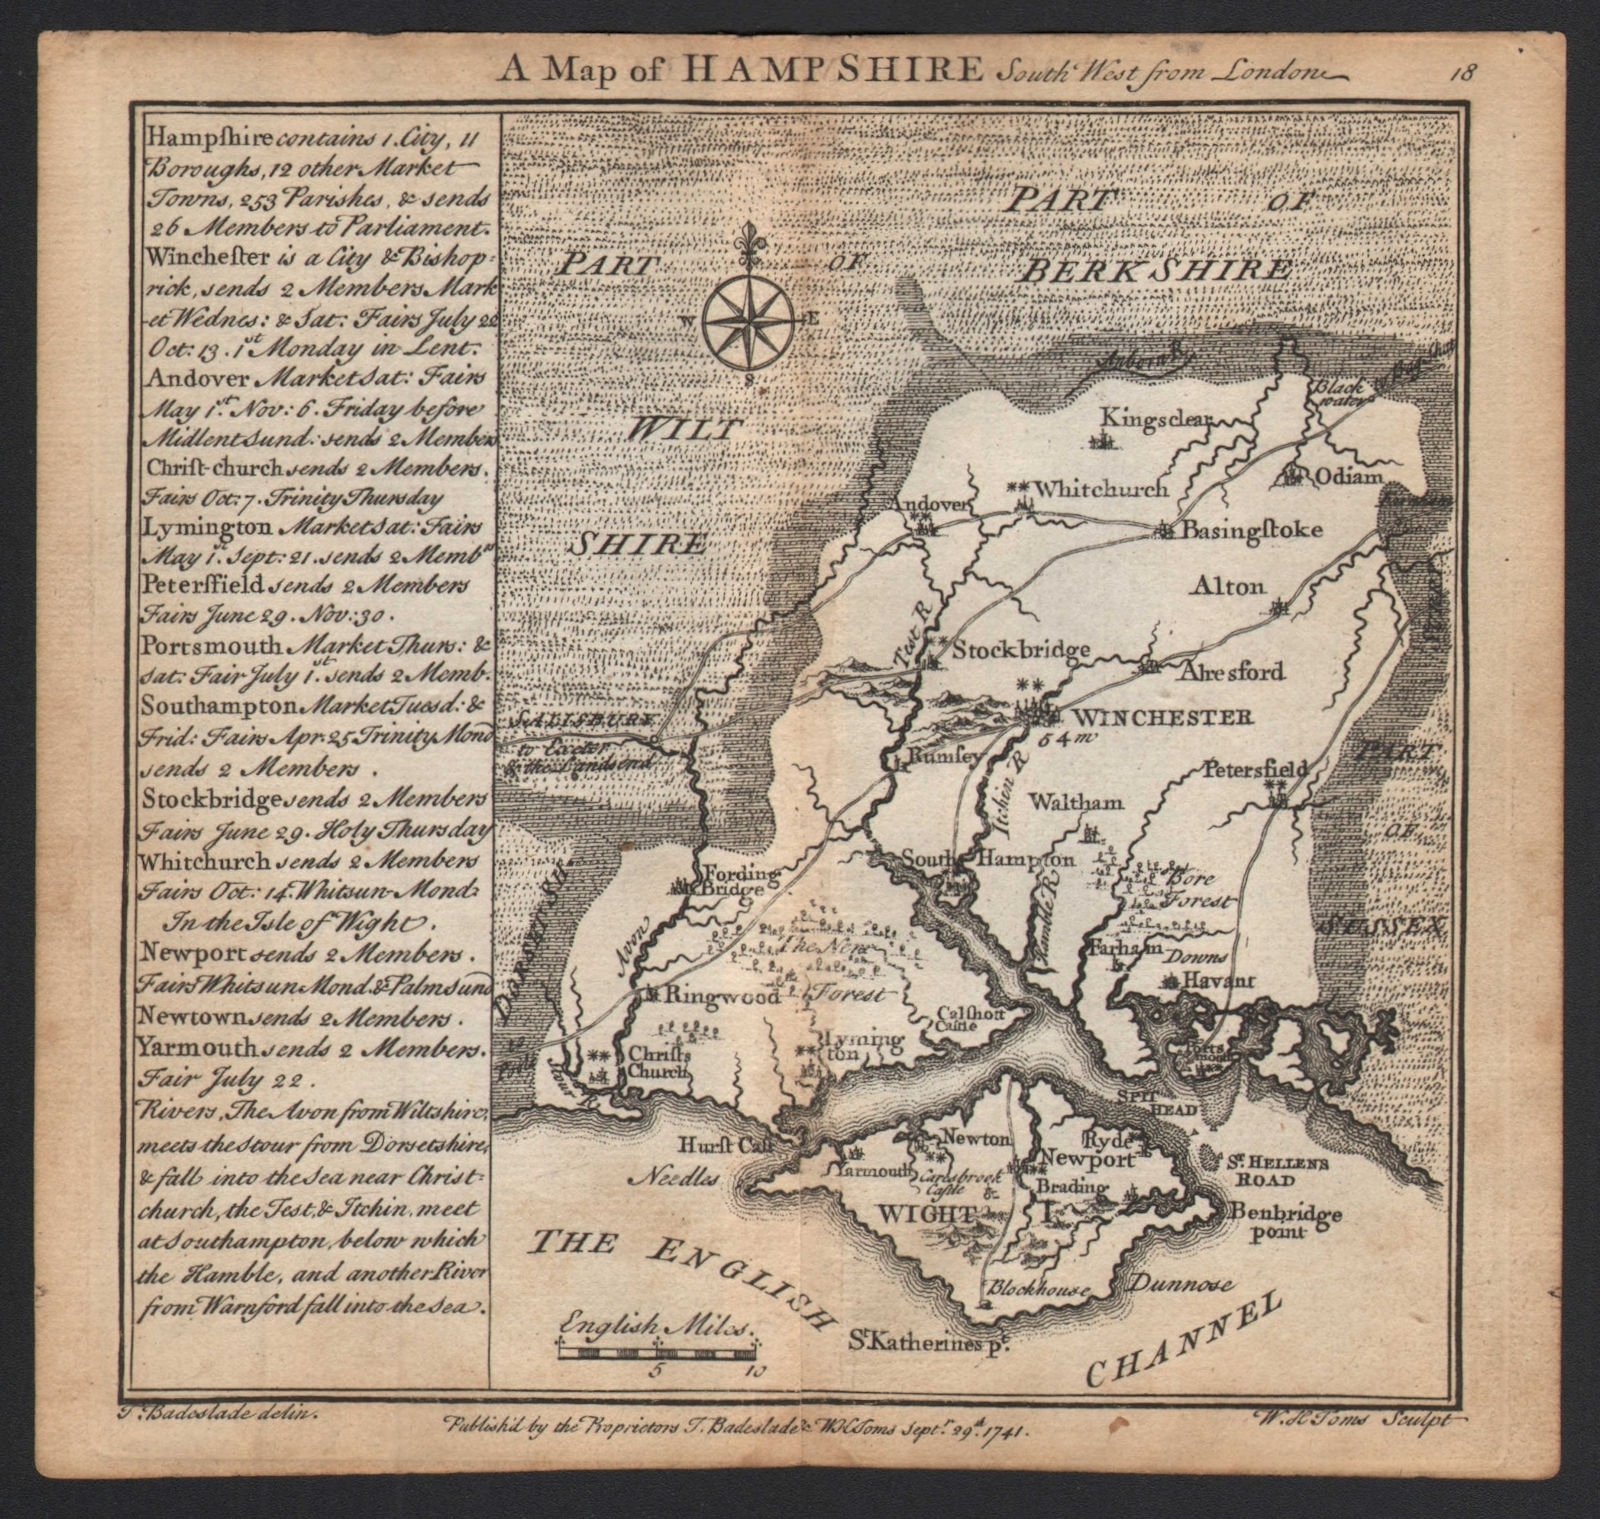 Associate Product Antique county map of Hampshire by Badeslade & Toms 1742 old chart